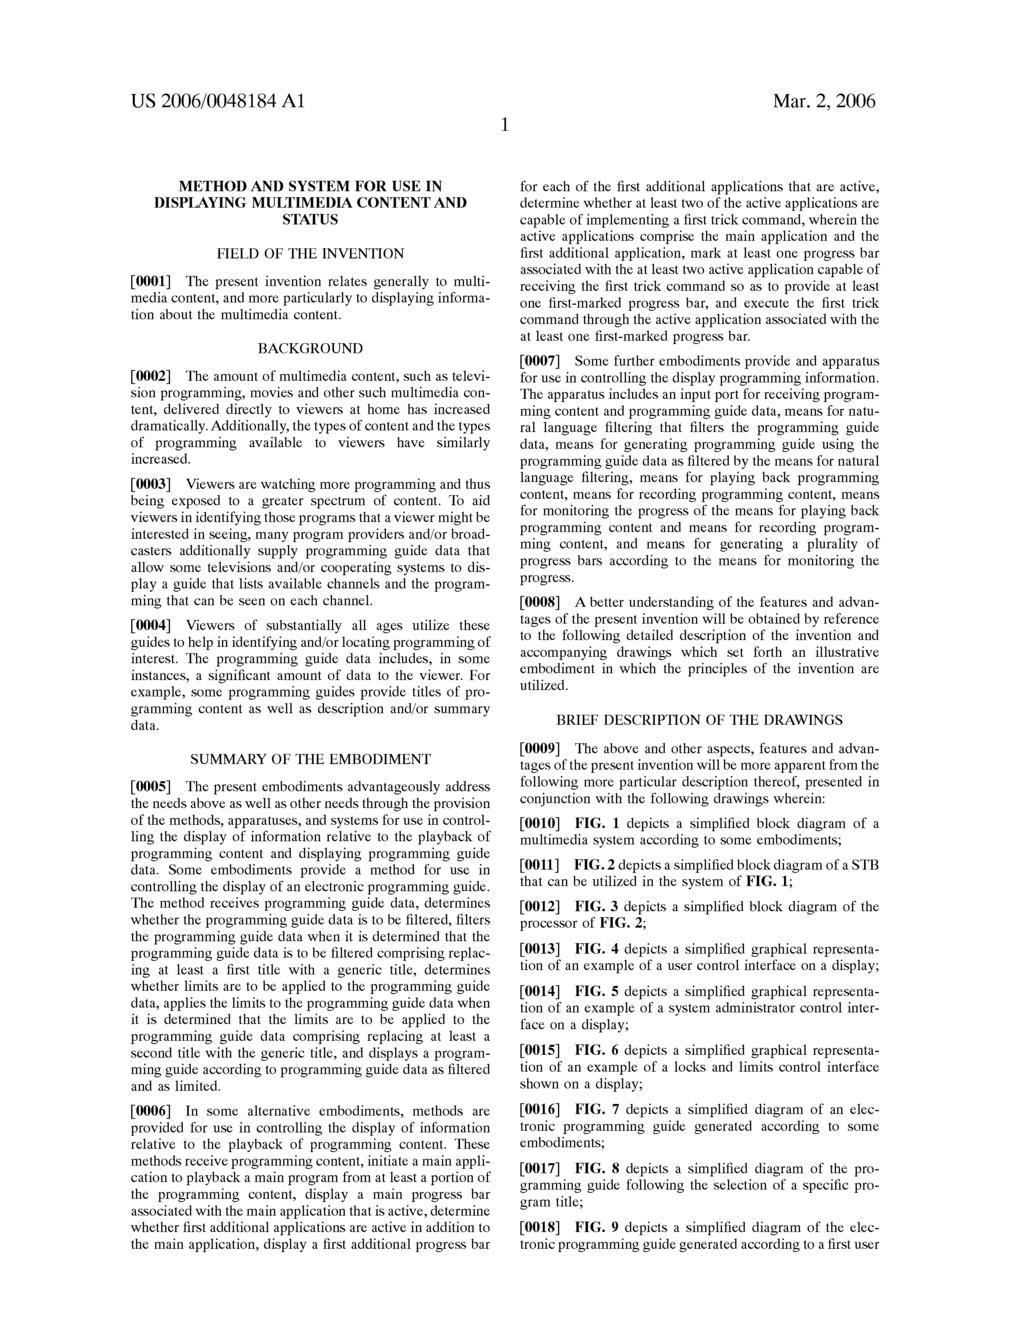 US 2006/0048.184 A1 Mar. 2, 2006 METHOD AND SYSTEM FOR USE IN DISPLAYING MULTIMEDIA CONTENT AND STATUS FIELD OF THE INVENTION 0001.